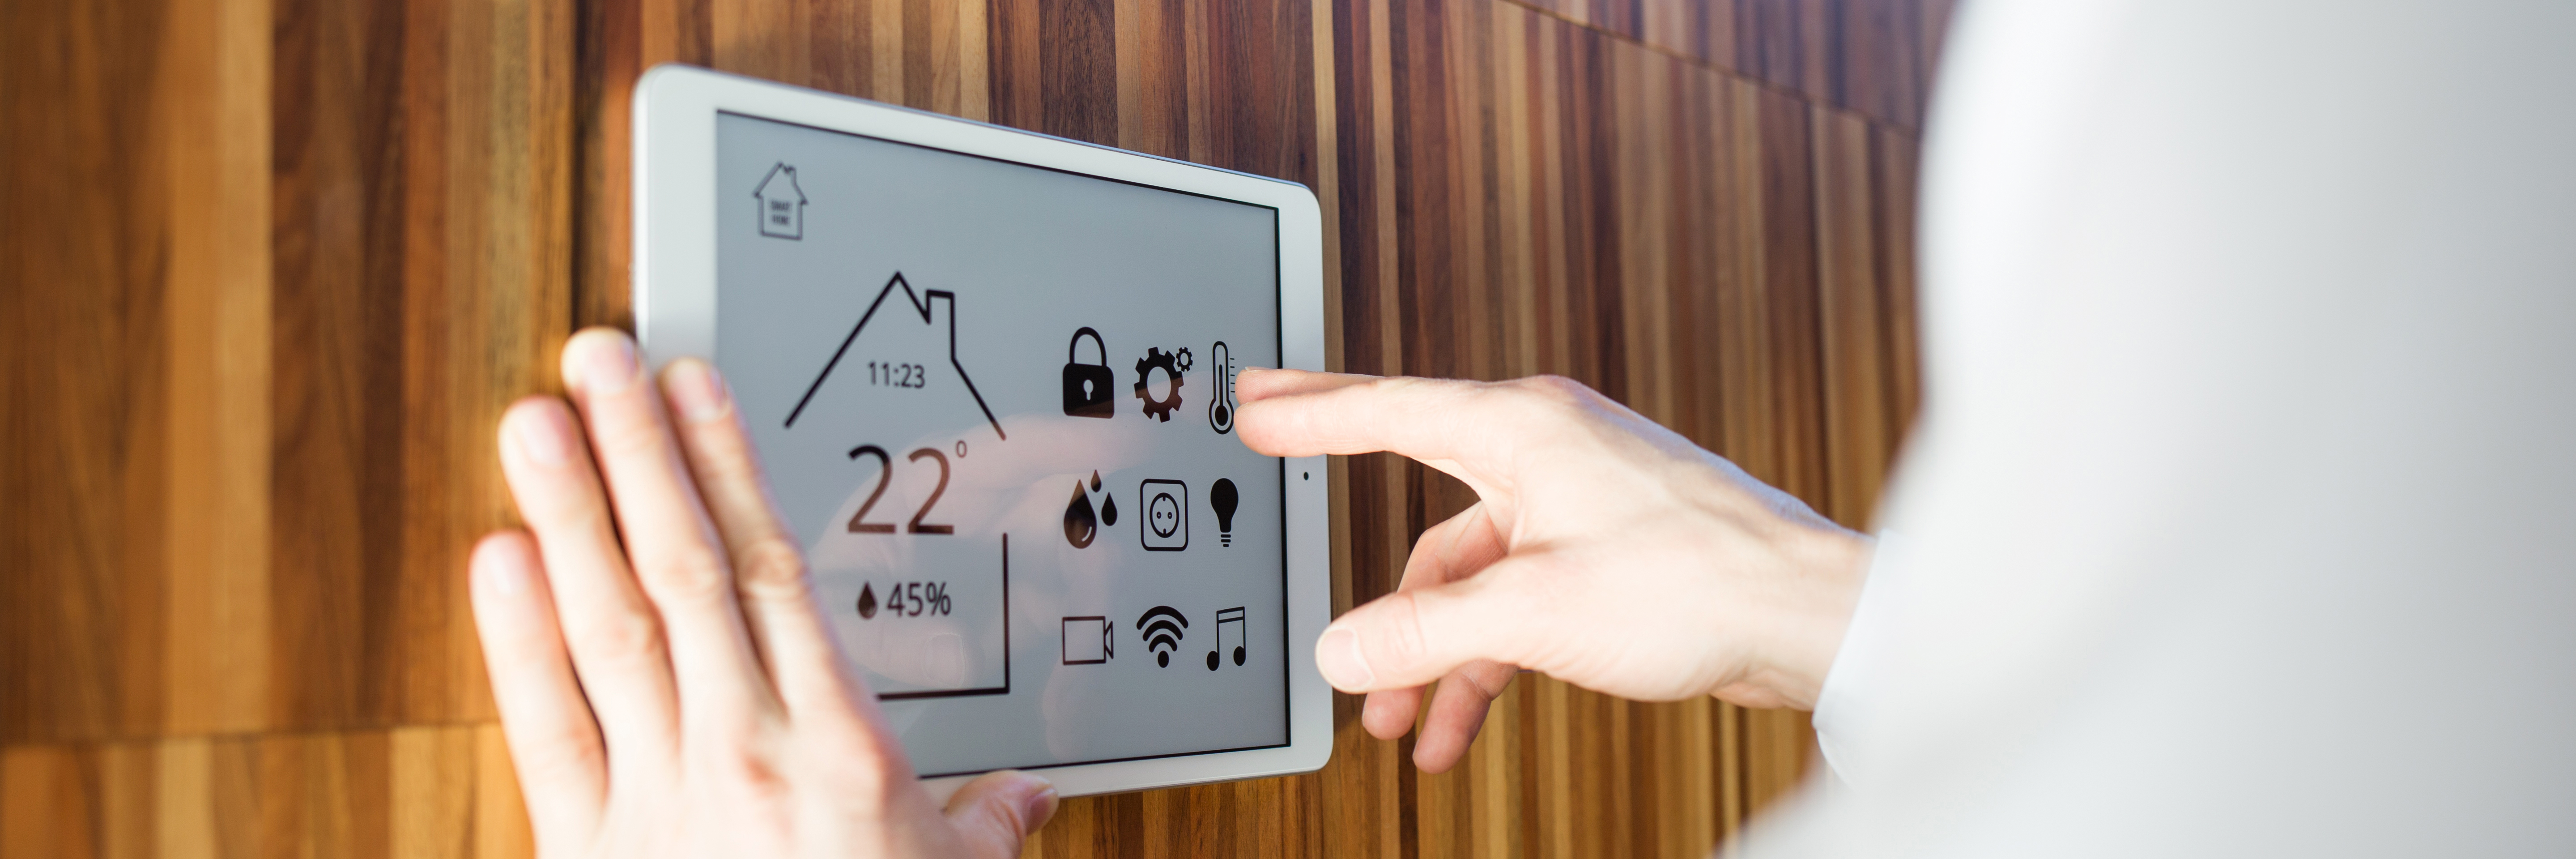 Smart Home Control Device Using Digital Tablets from Remal Security Systems